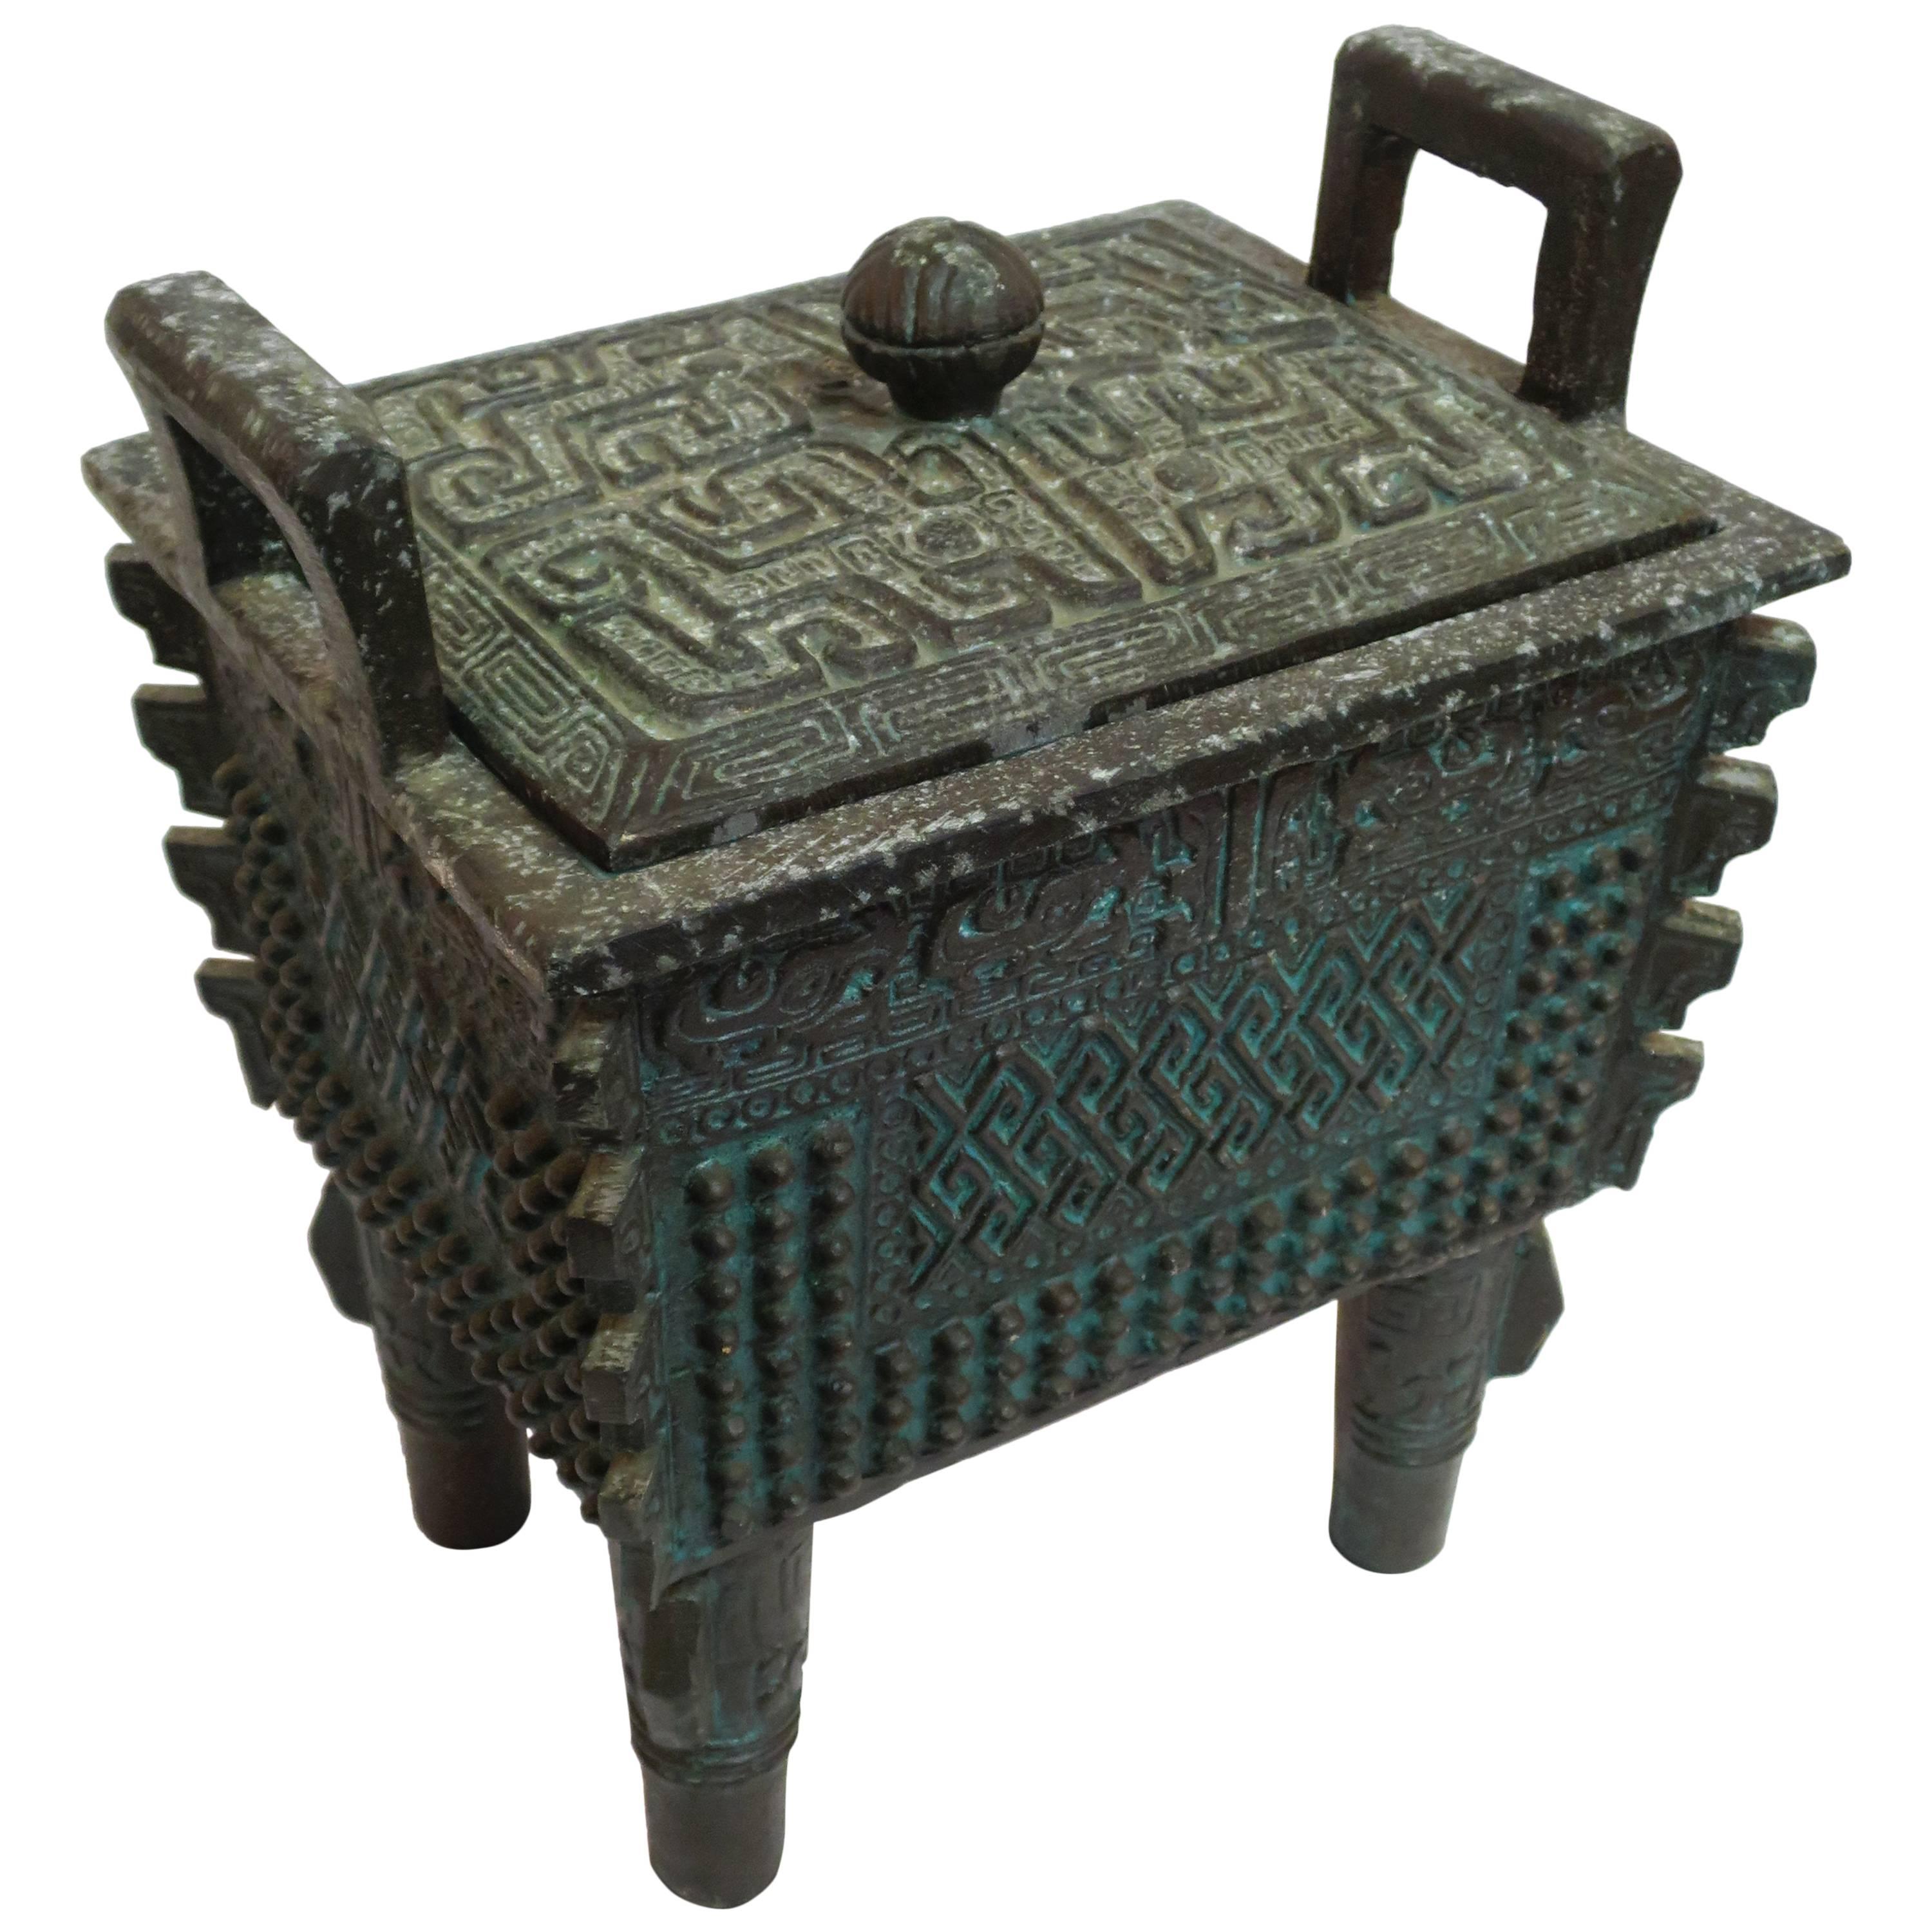 Mayan Motif Ice Bucket in the Manner of James Mont